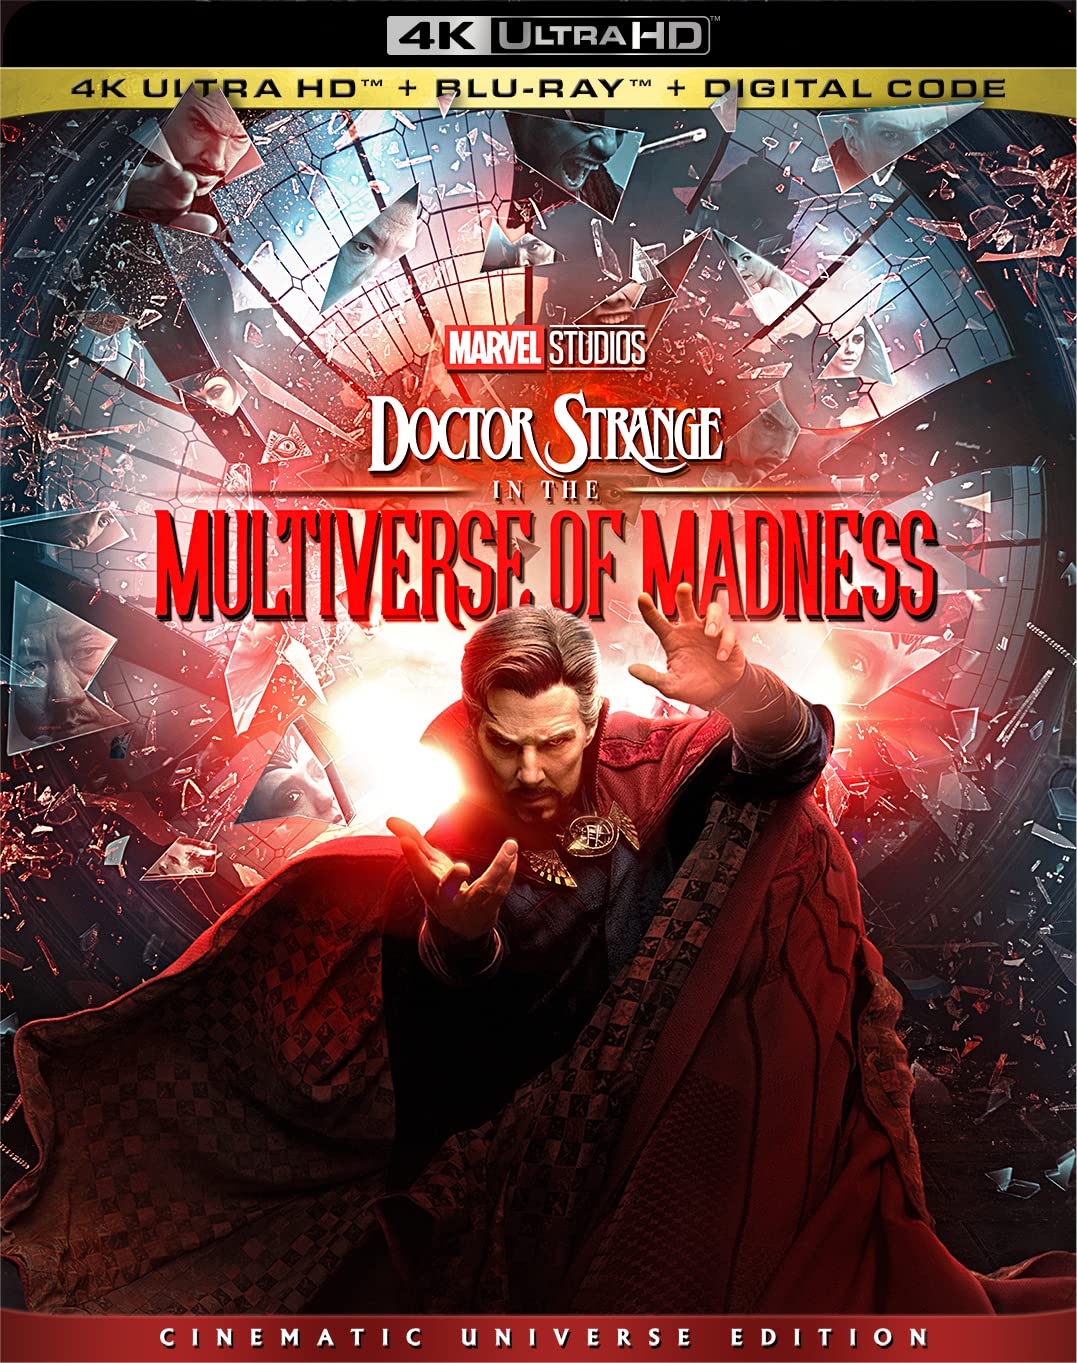 Doctor Strange in the Multiverse of Madness on digital and Blu-Ray